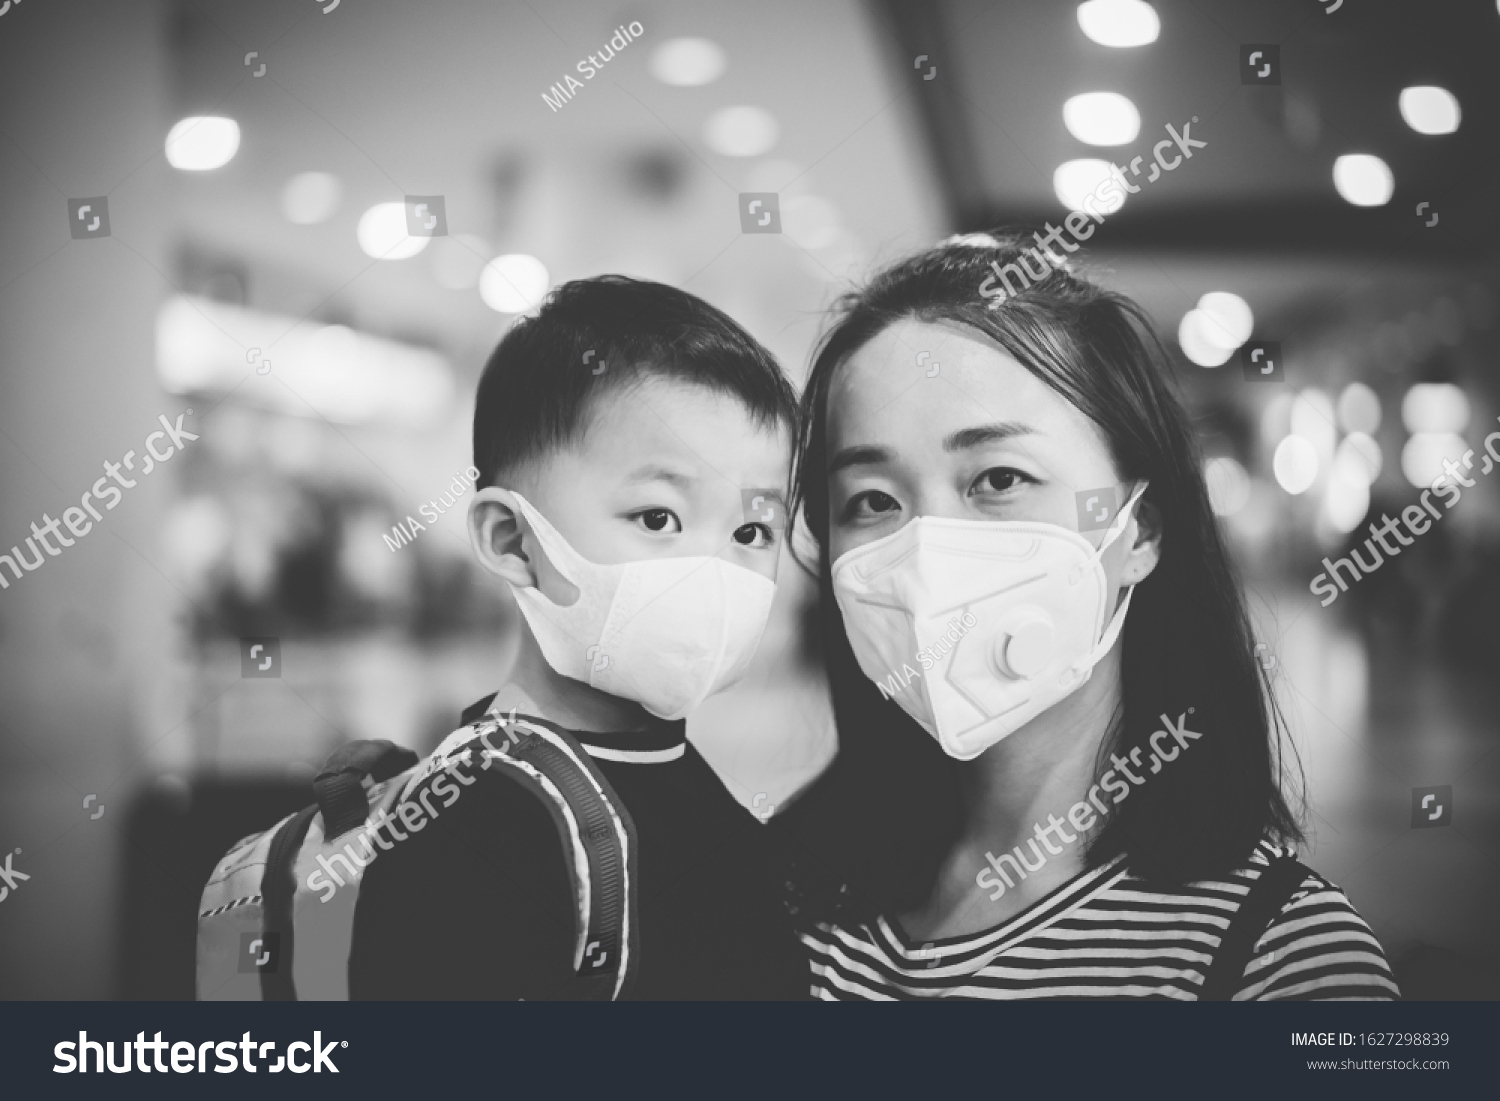 Coronavirus covid-19.Asian tourism kid toddler boy with mother mask for protect coronavirus back to school.vaccinated family at airport.Digital health passport certificate for travel during covid19. #1627298839